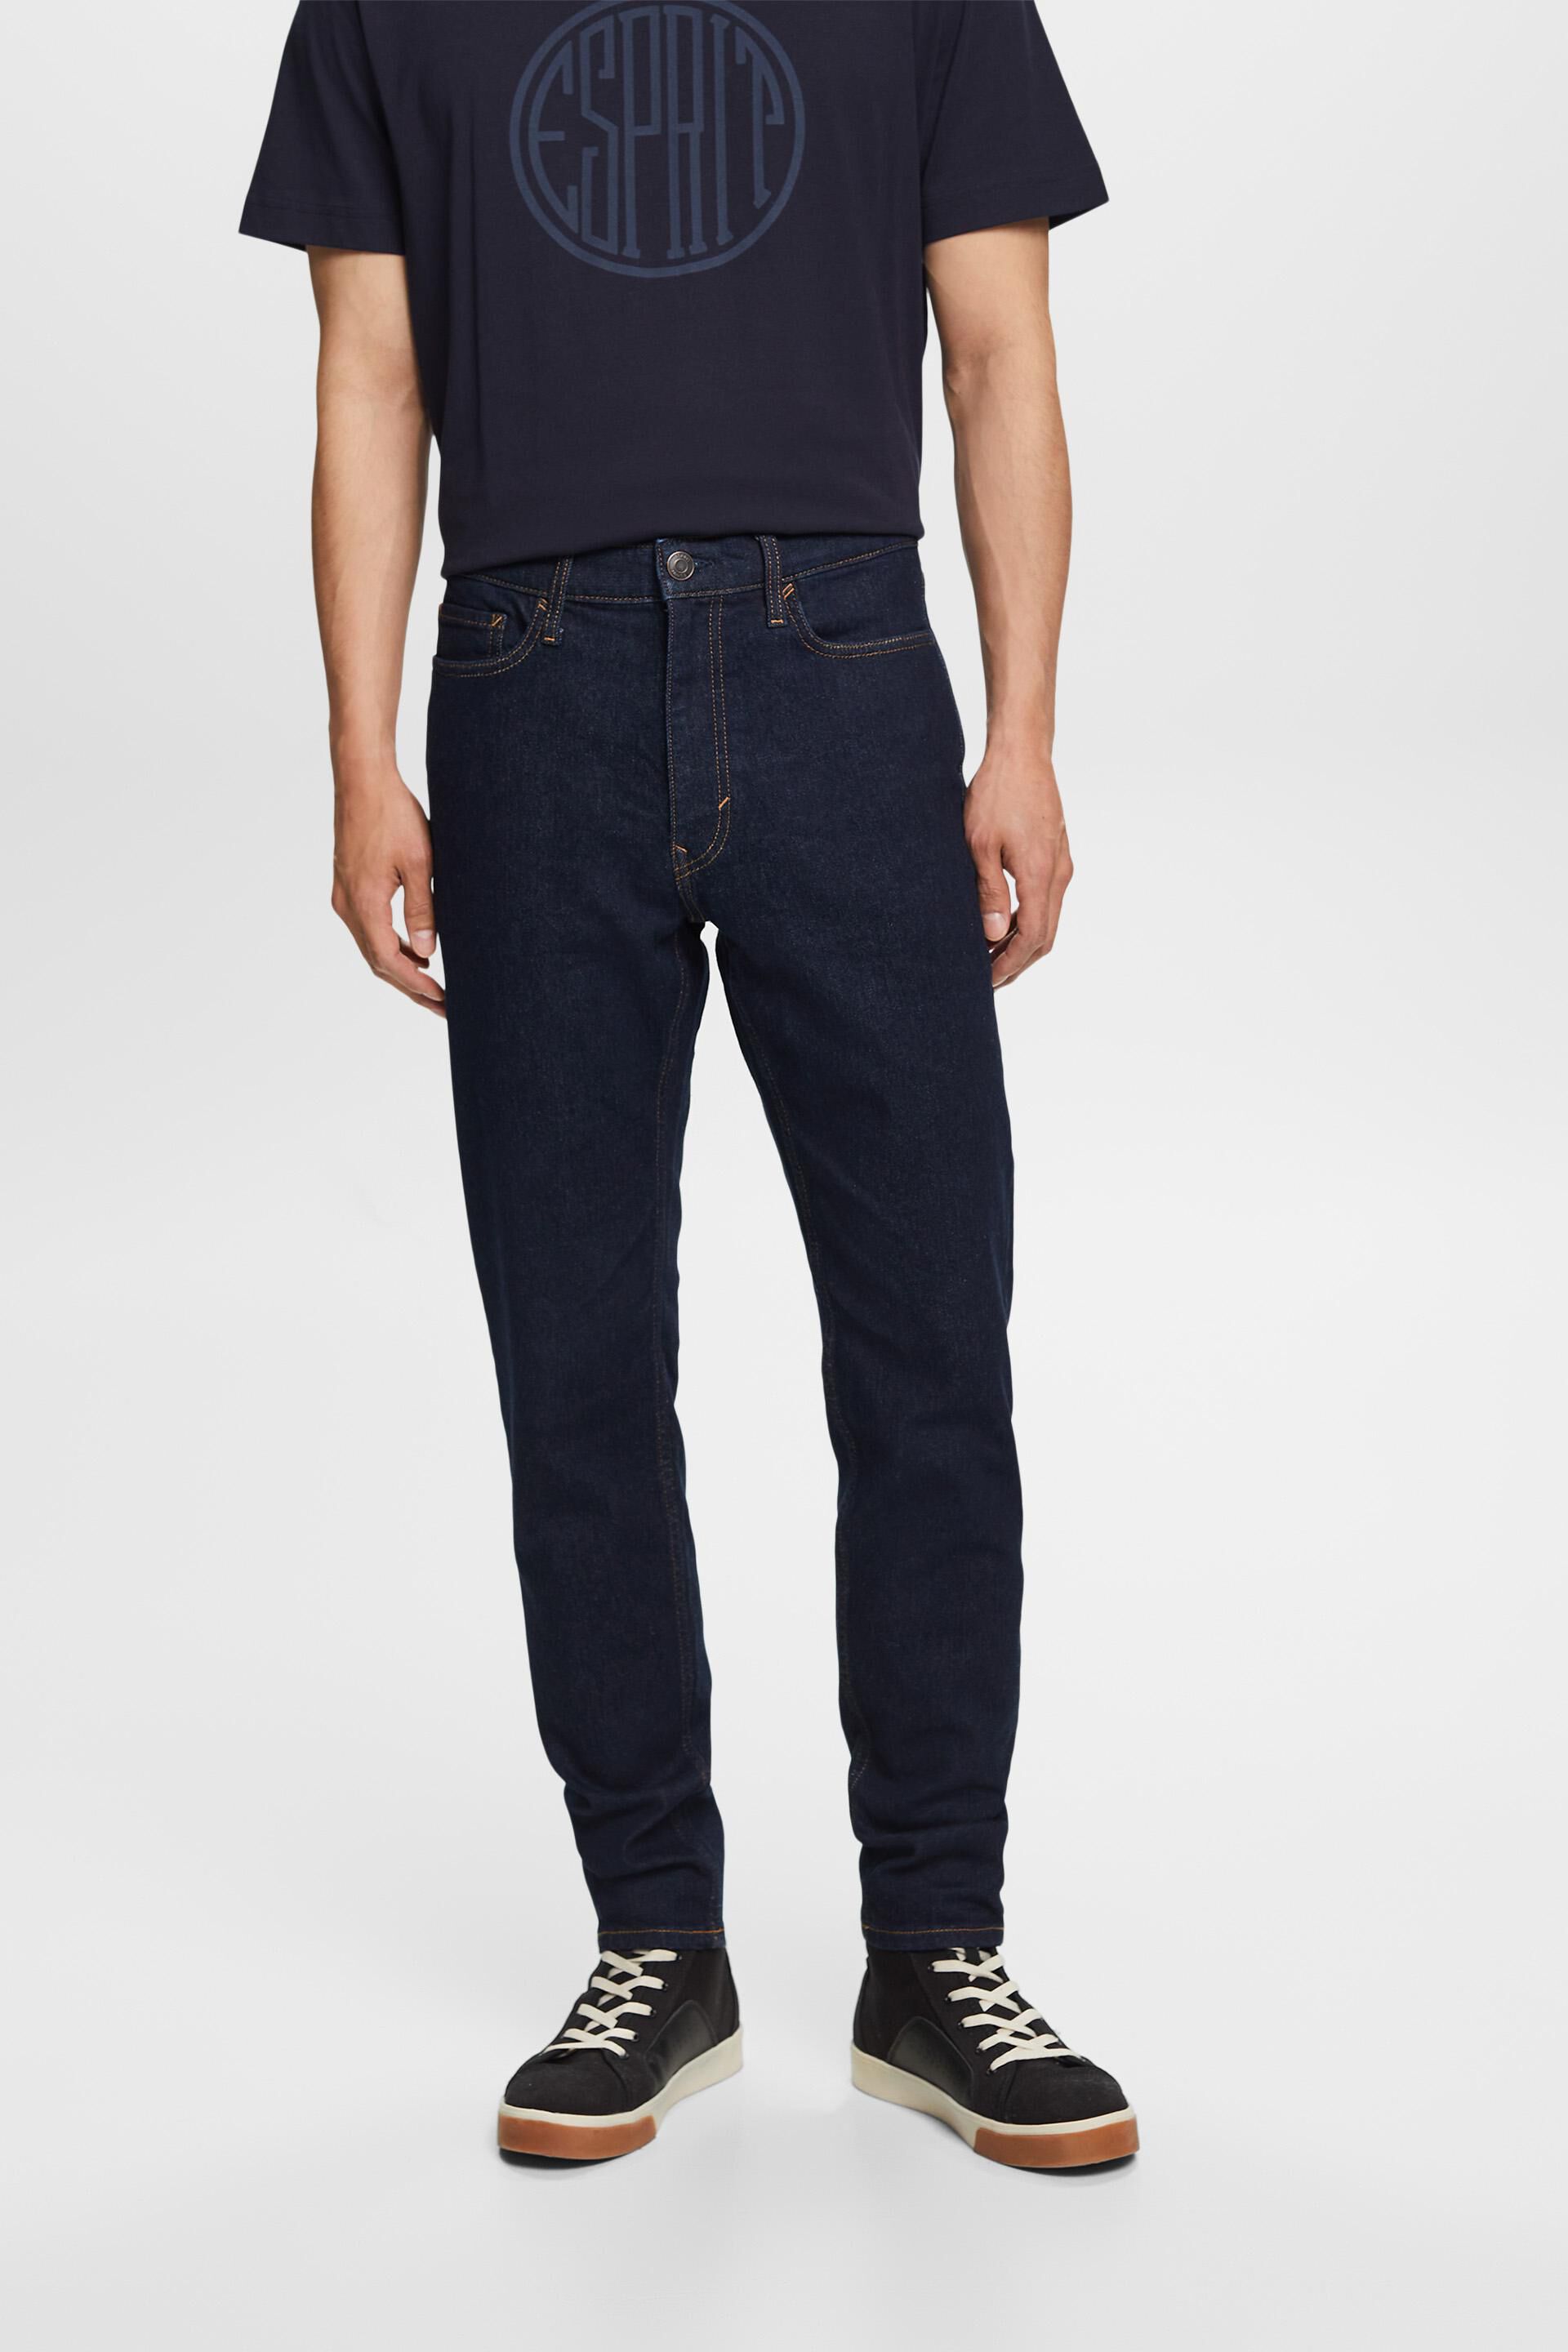 Esprit Tapered jeans fit